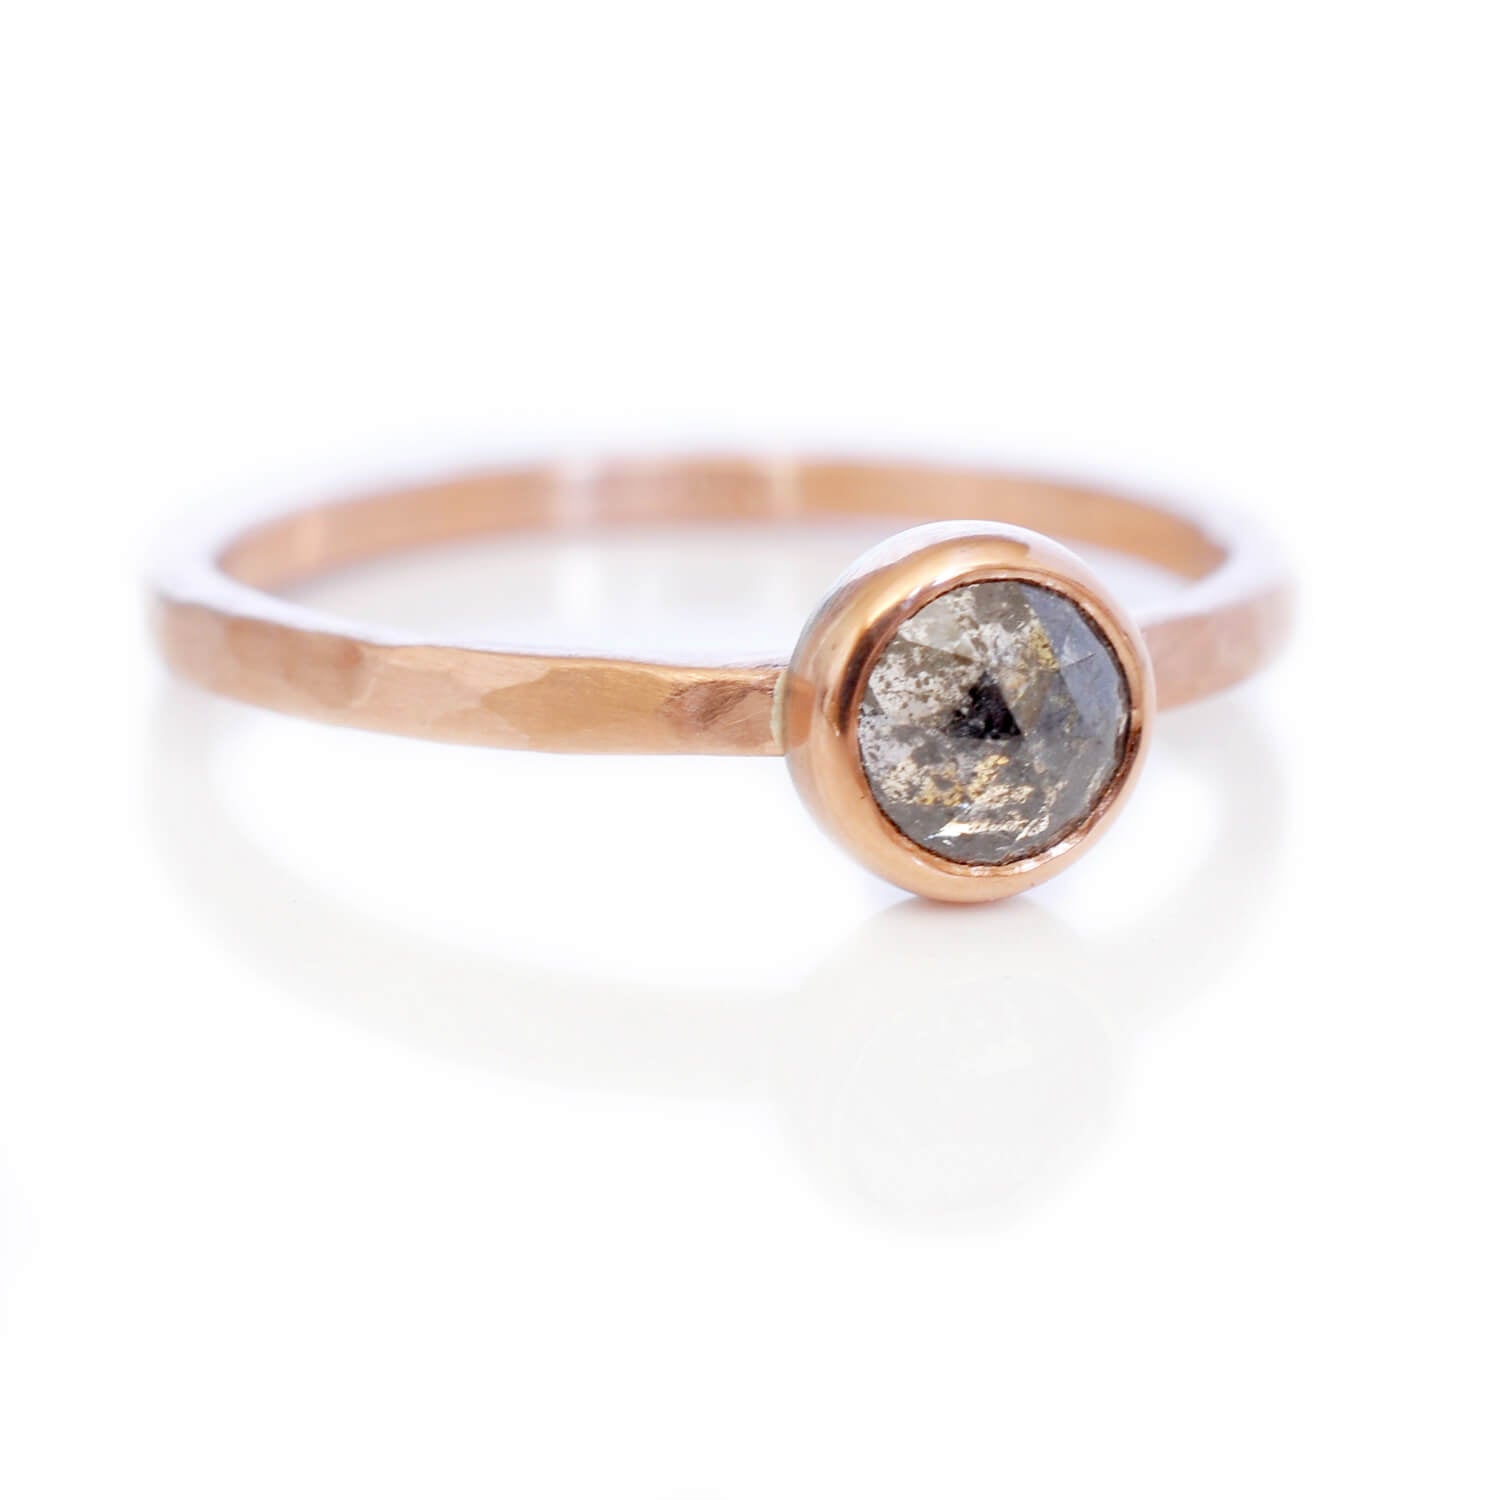 Rose gold and salt and pepper diamond engagement ring. Handmade by EC Design Jewelry in Minneapolis, MN.